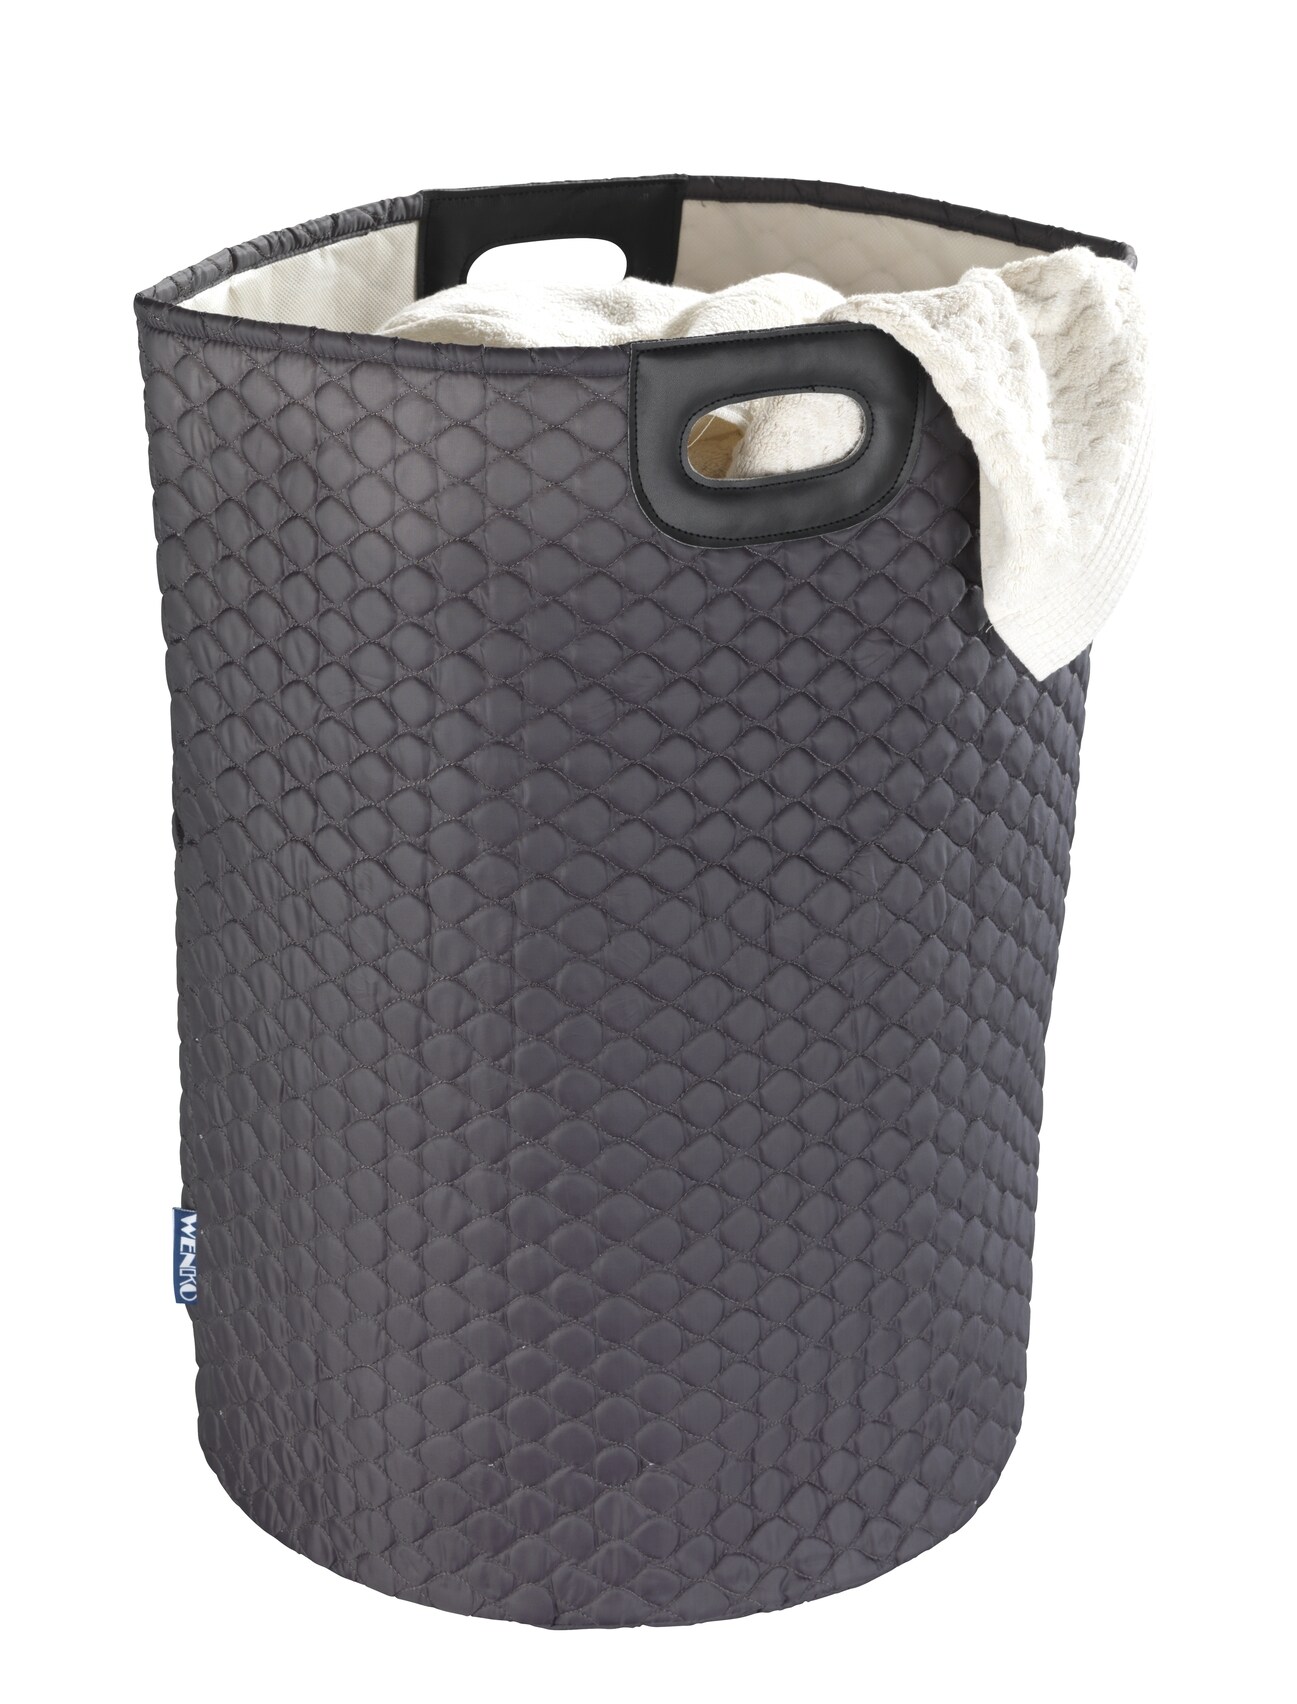 Details about   Laundry Bags Sloth Washing Foldable Laundry Baskets Mesh Hamper Clothes Storage 